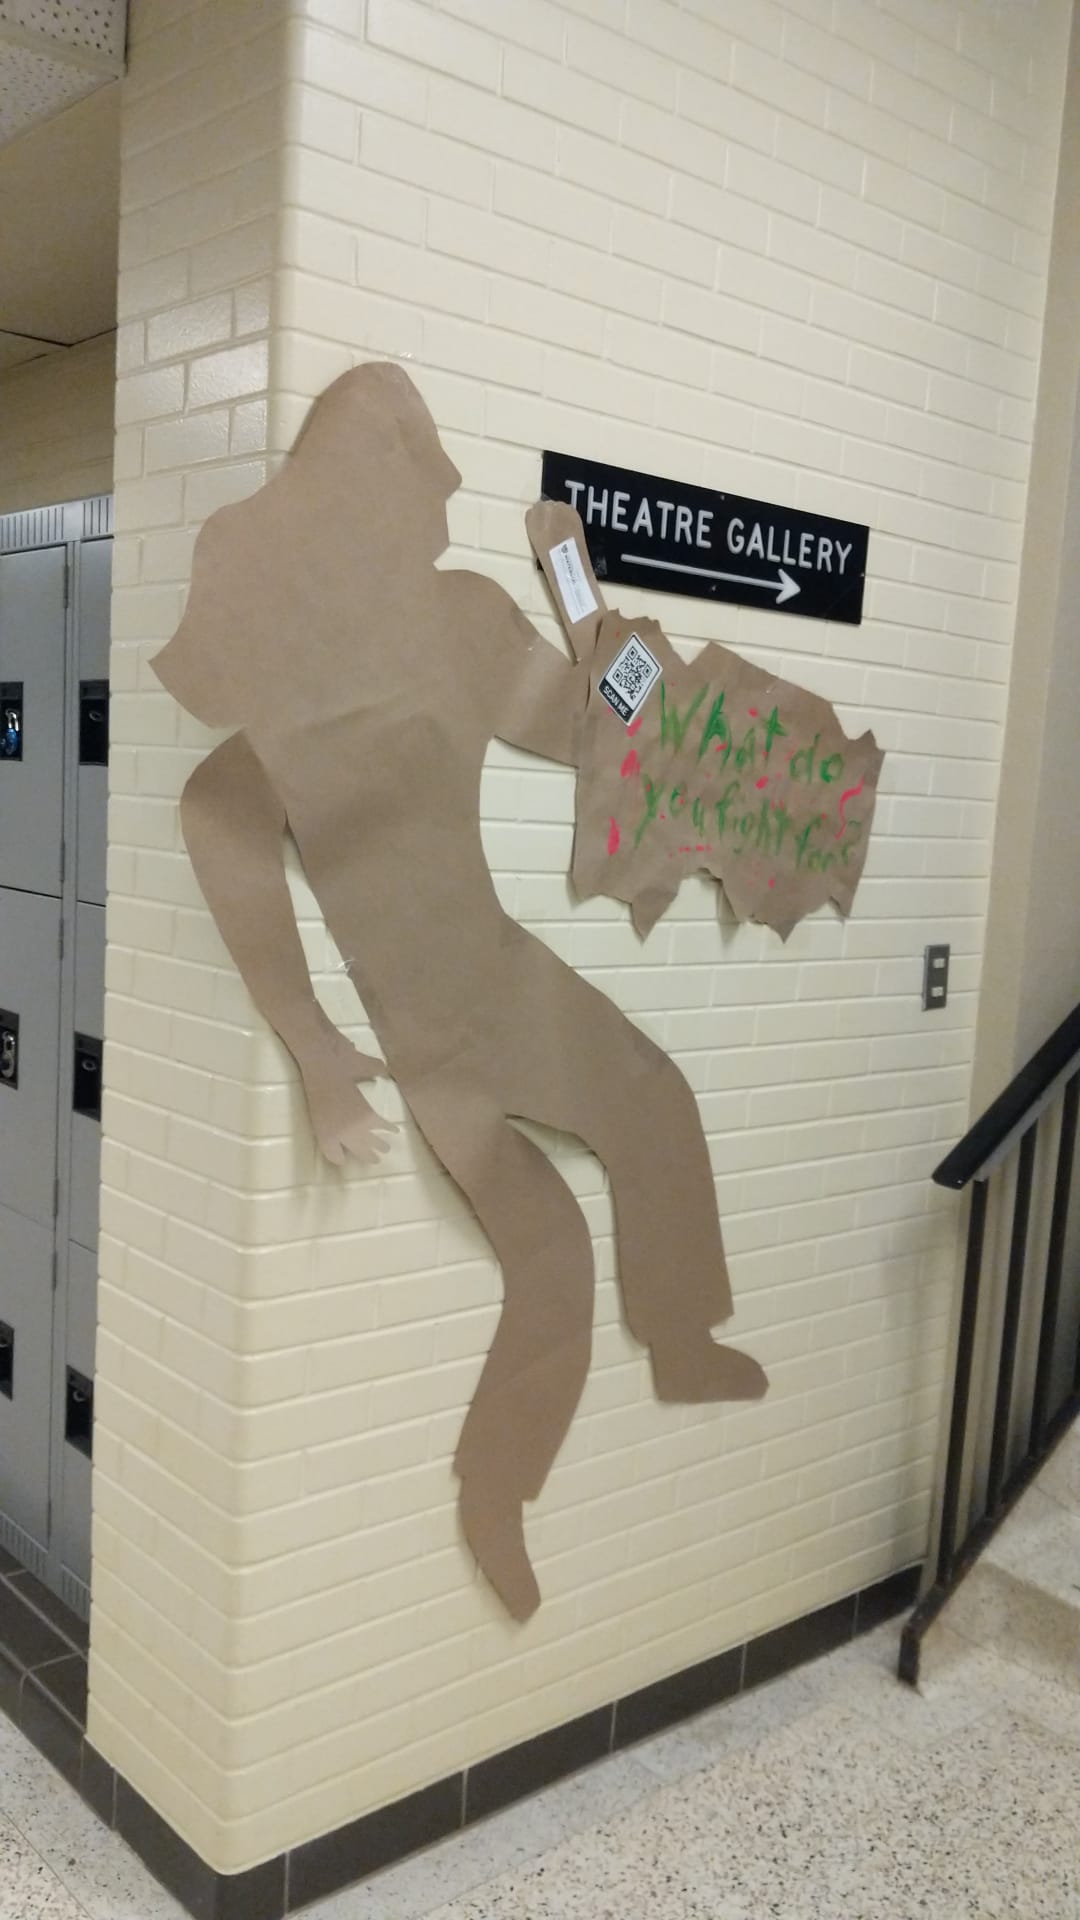 Photo of a cut out silhouette hung up on the wall near a sign for the Theatre Gallery